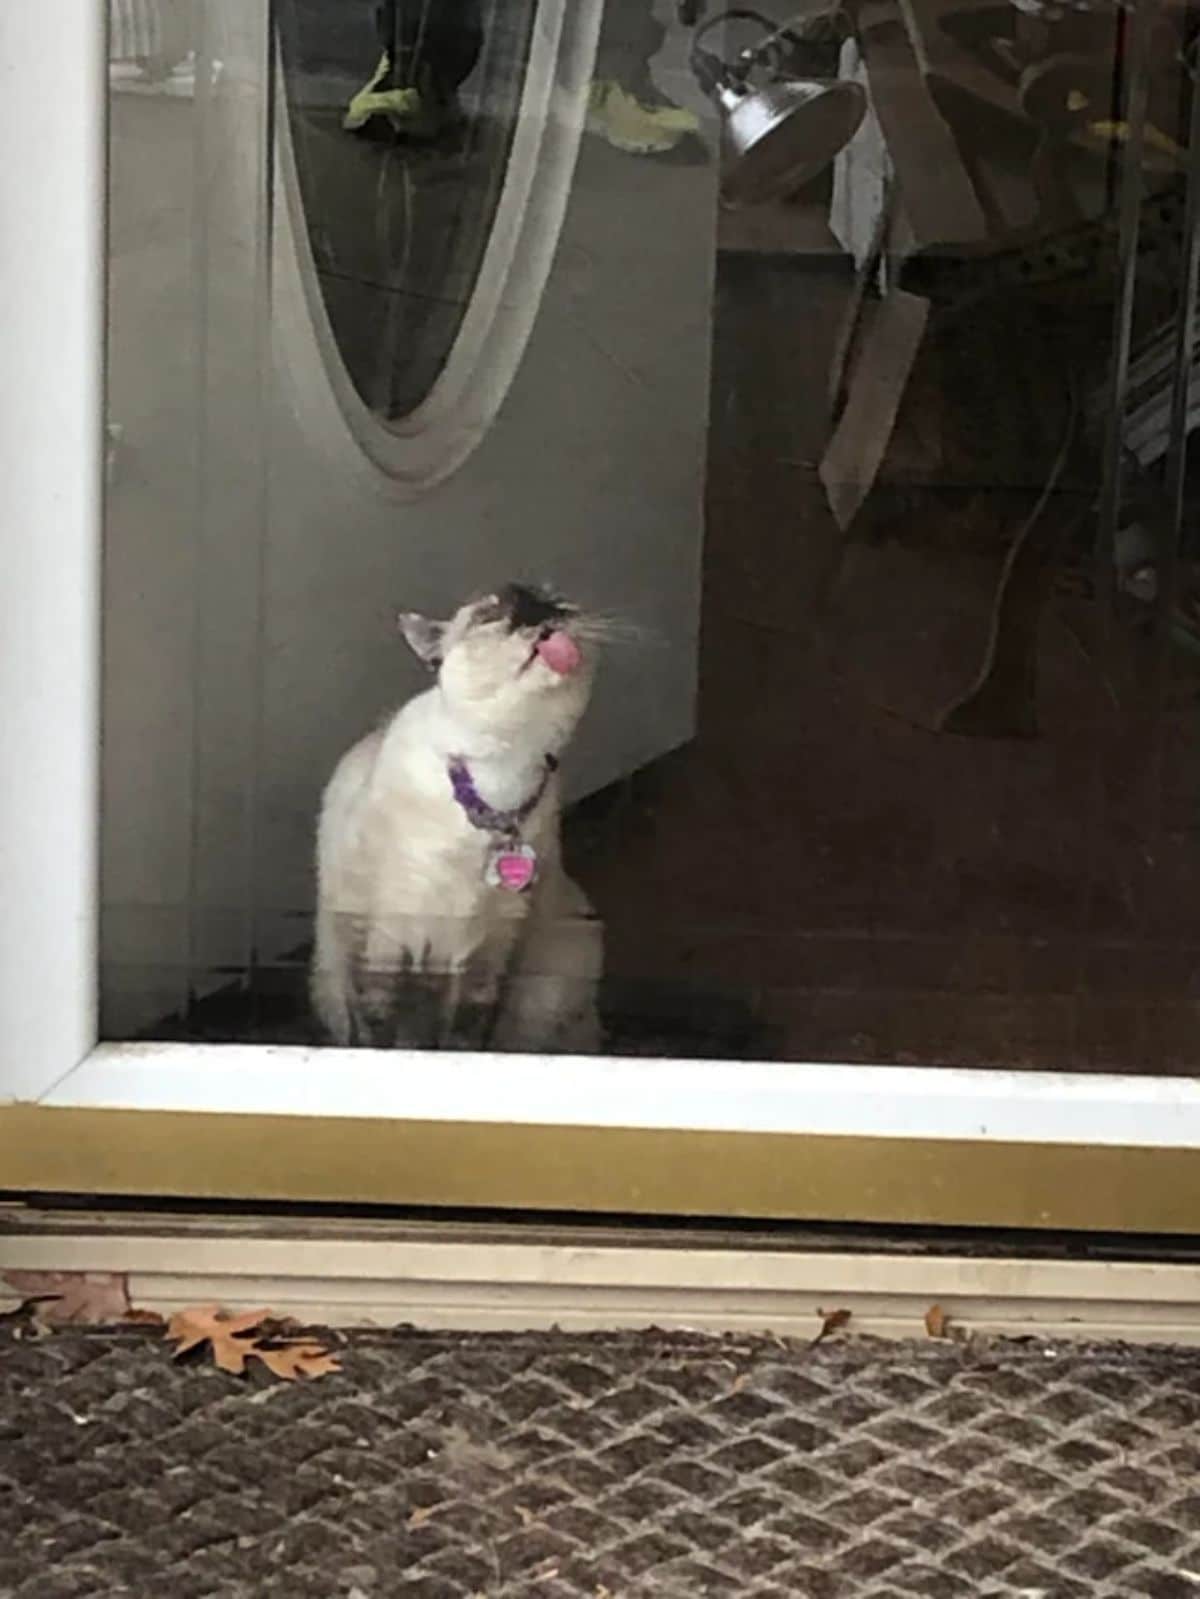 white and black siamese cat licking a glass door